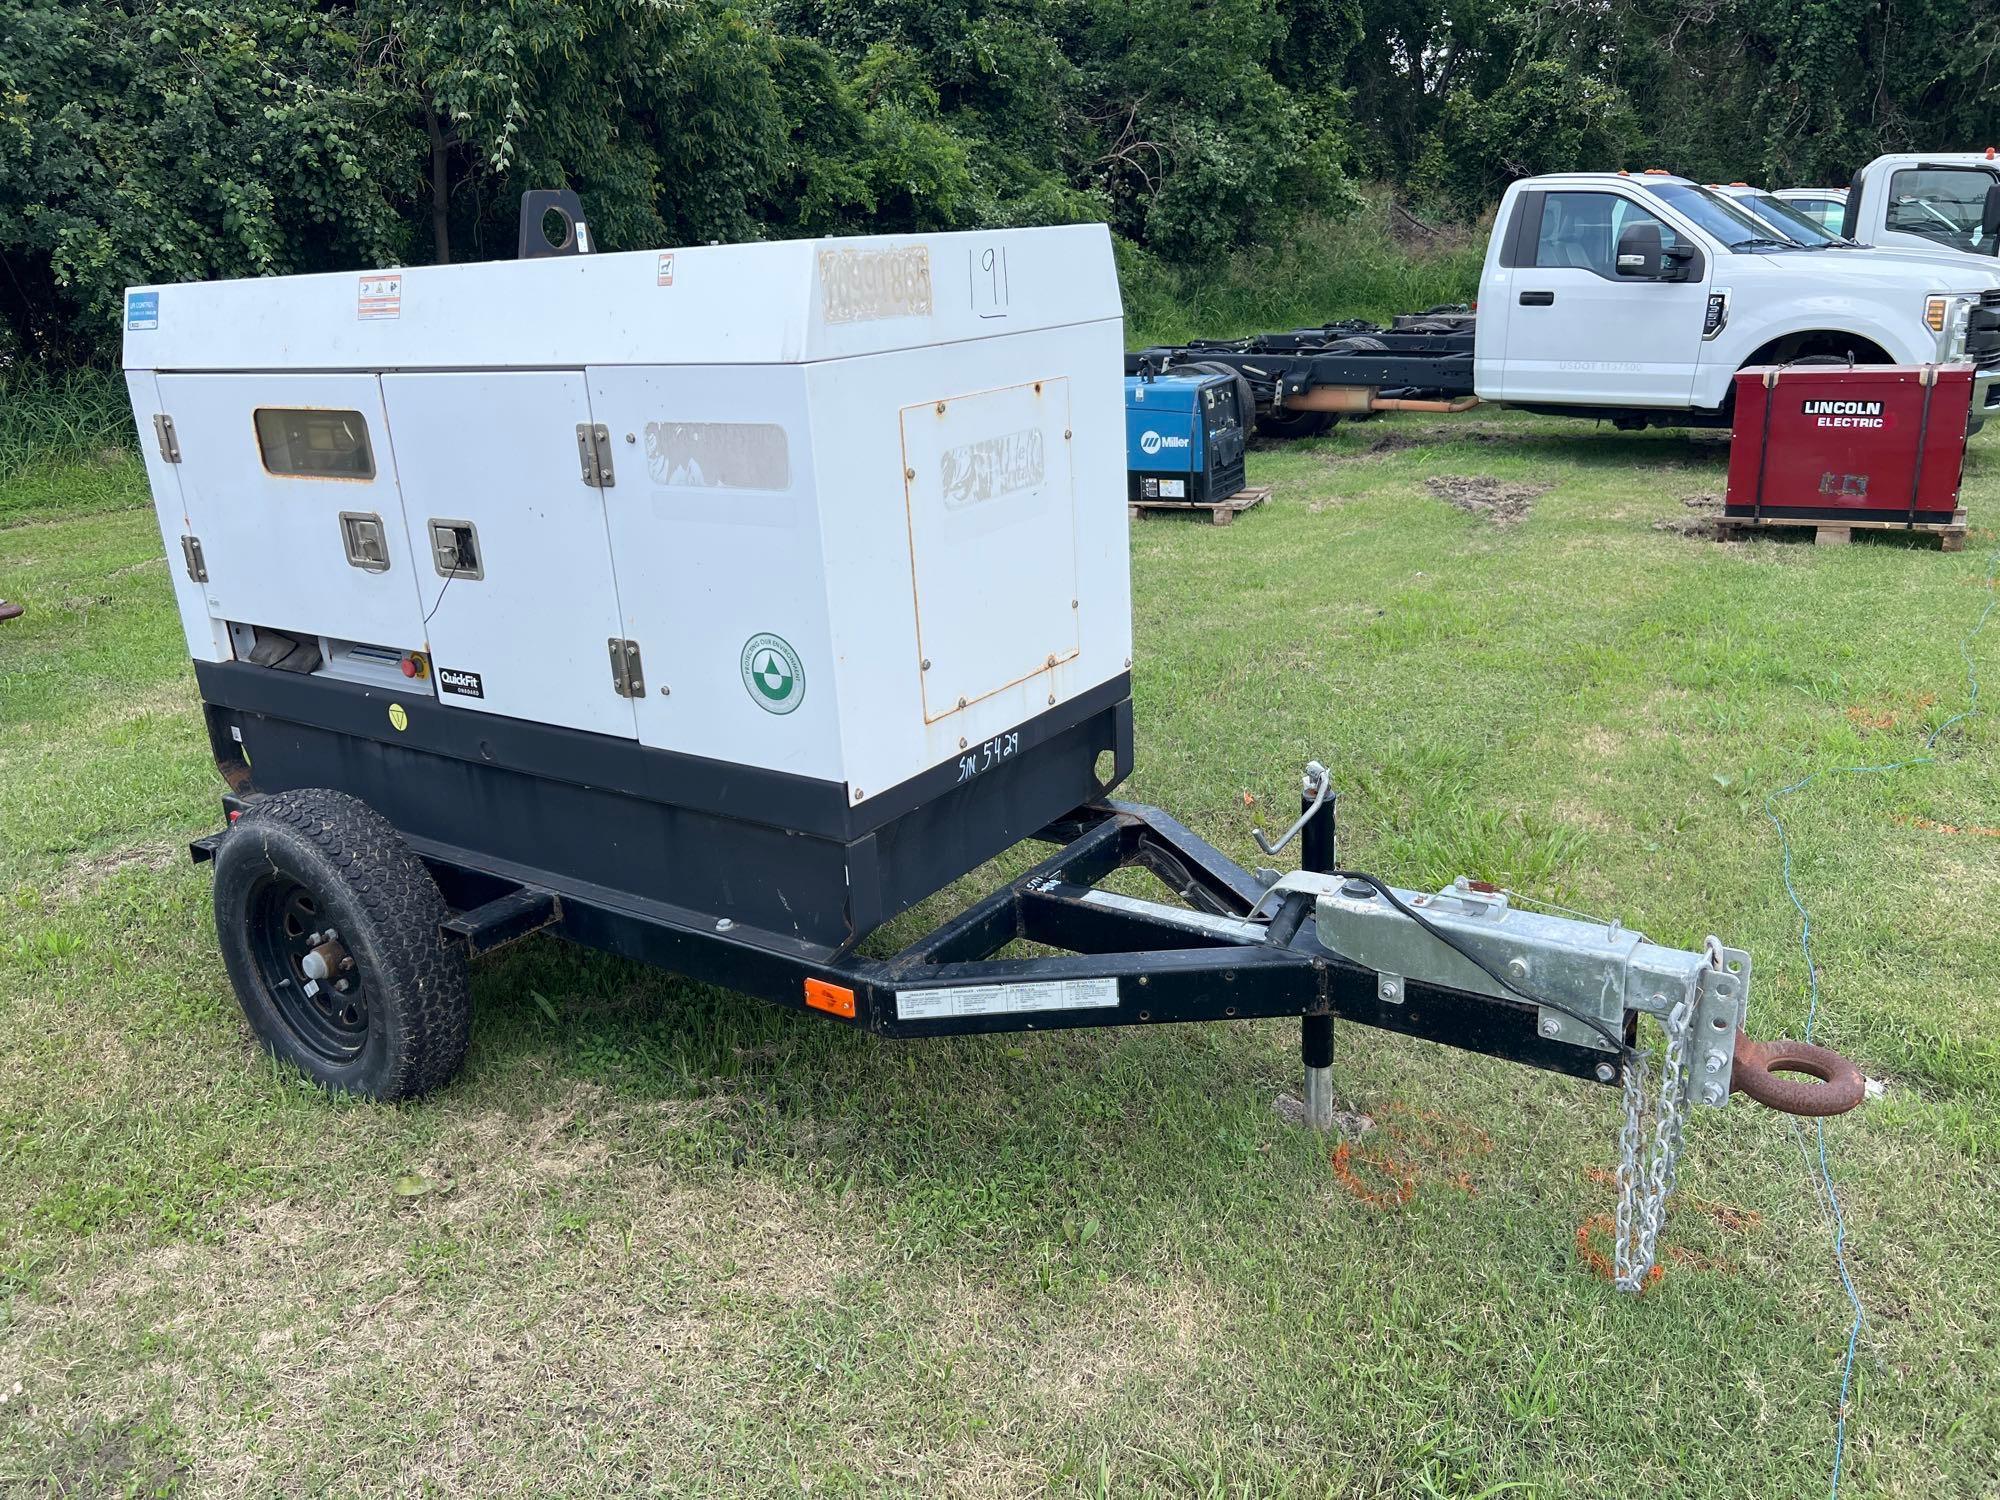 2019 WACKER G25 T4F GENERATOR SN:24505429 powered by diesel engine, equipped with 25KVA, trailer